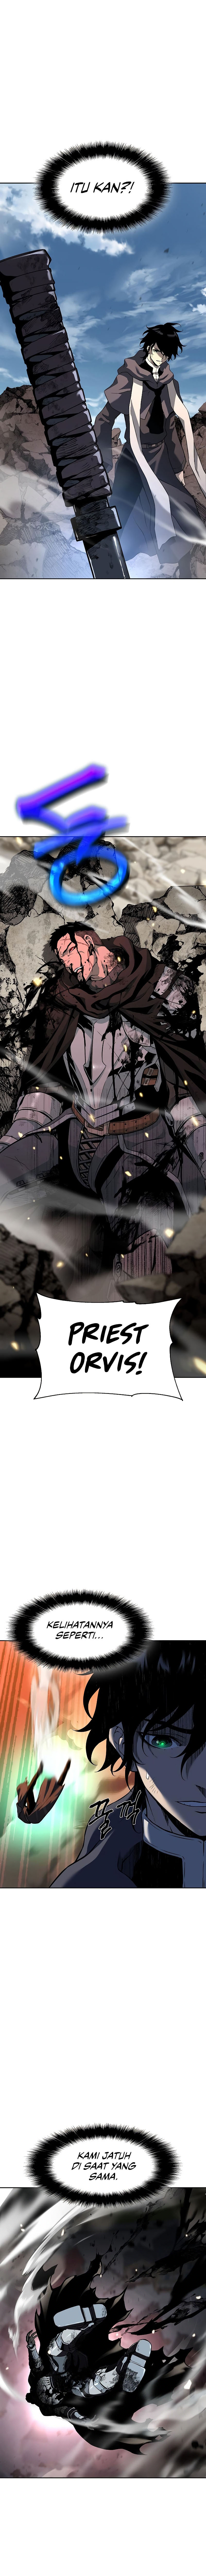 The Priest Of Corruption Chapter 5